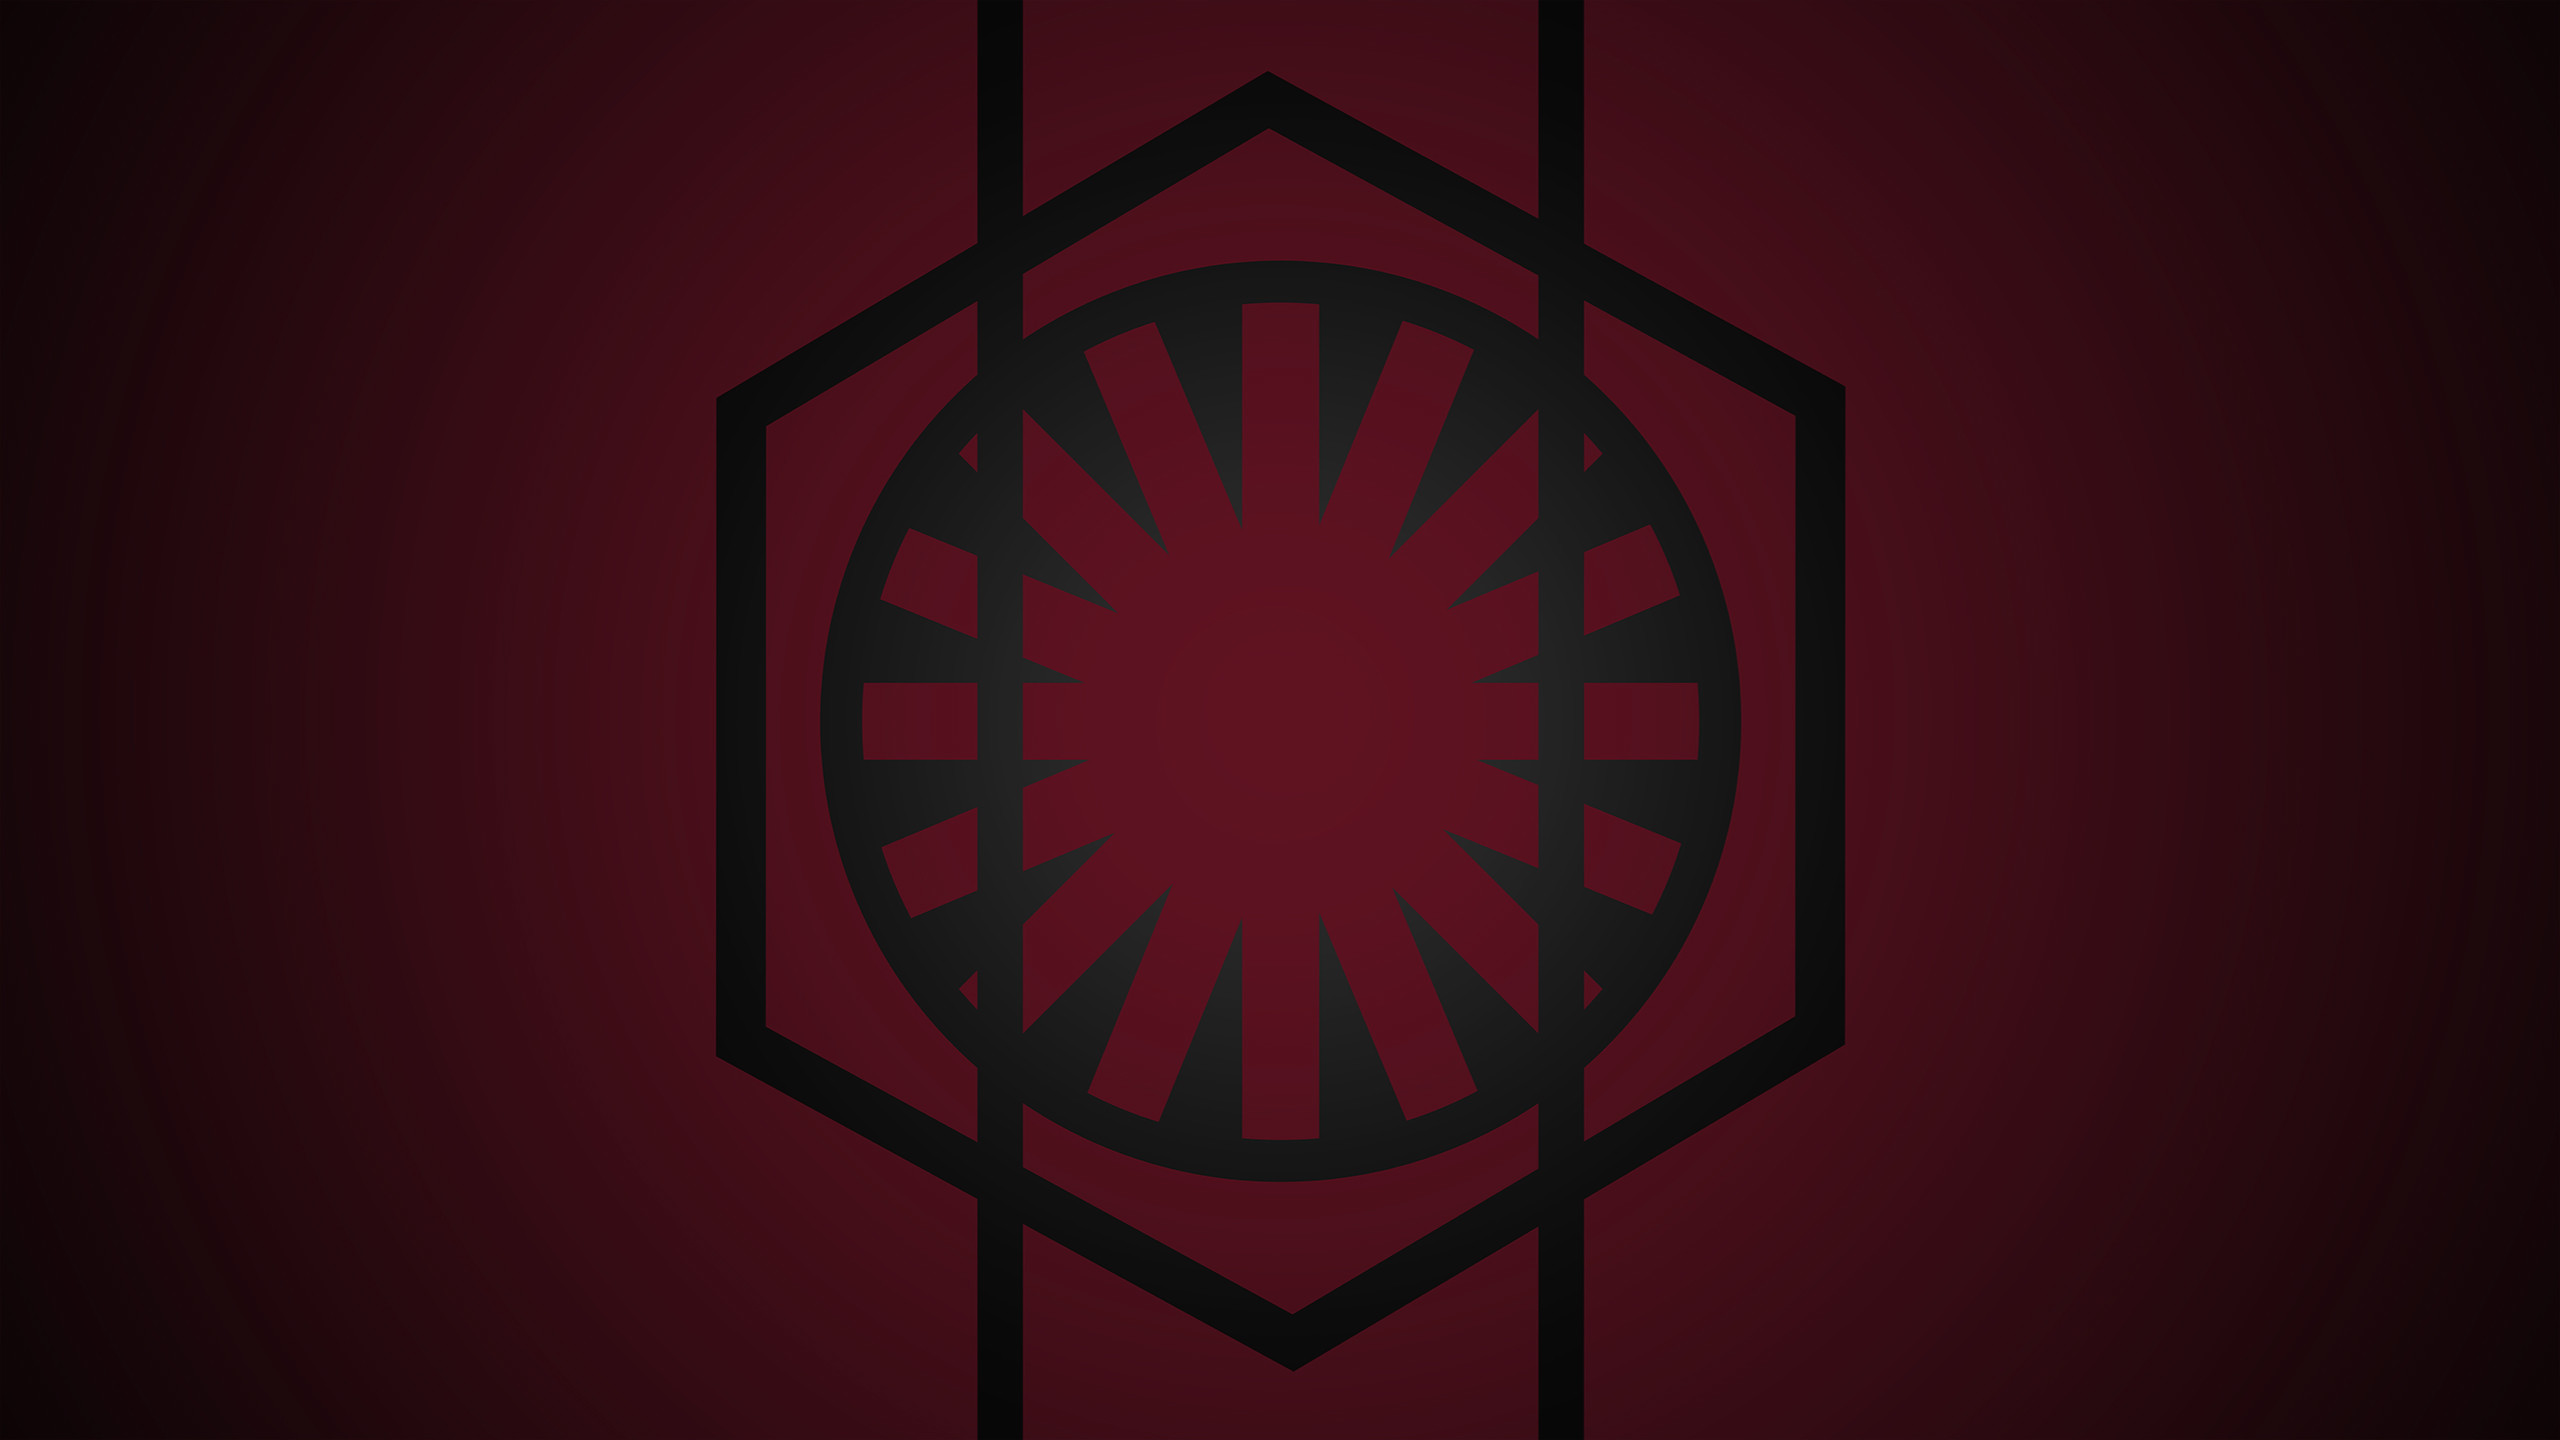 My first attempt at a "new Empire" wallpaper.